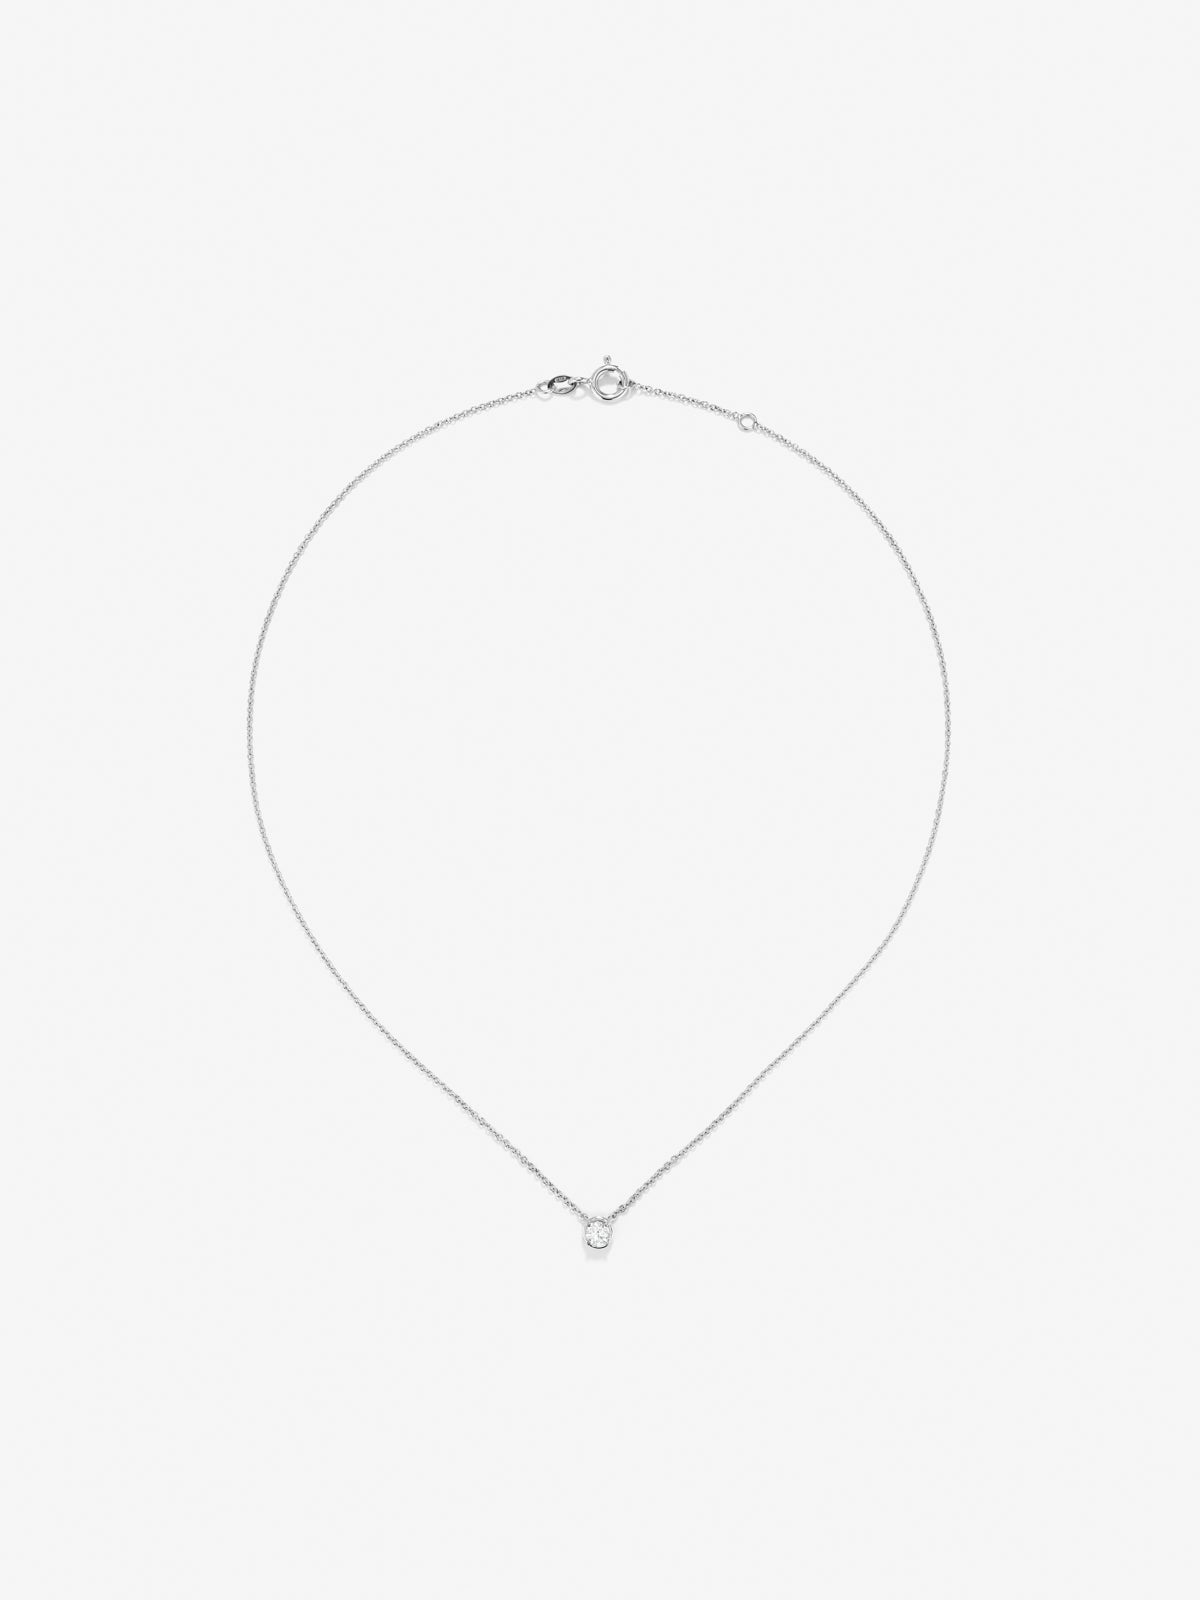 18K white gold chain pendant with solitary diamond